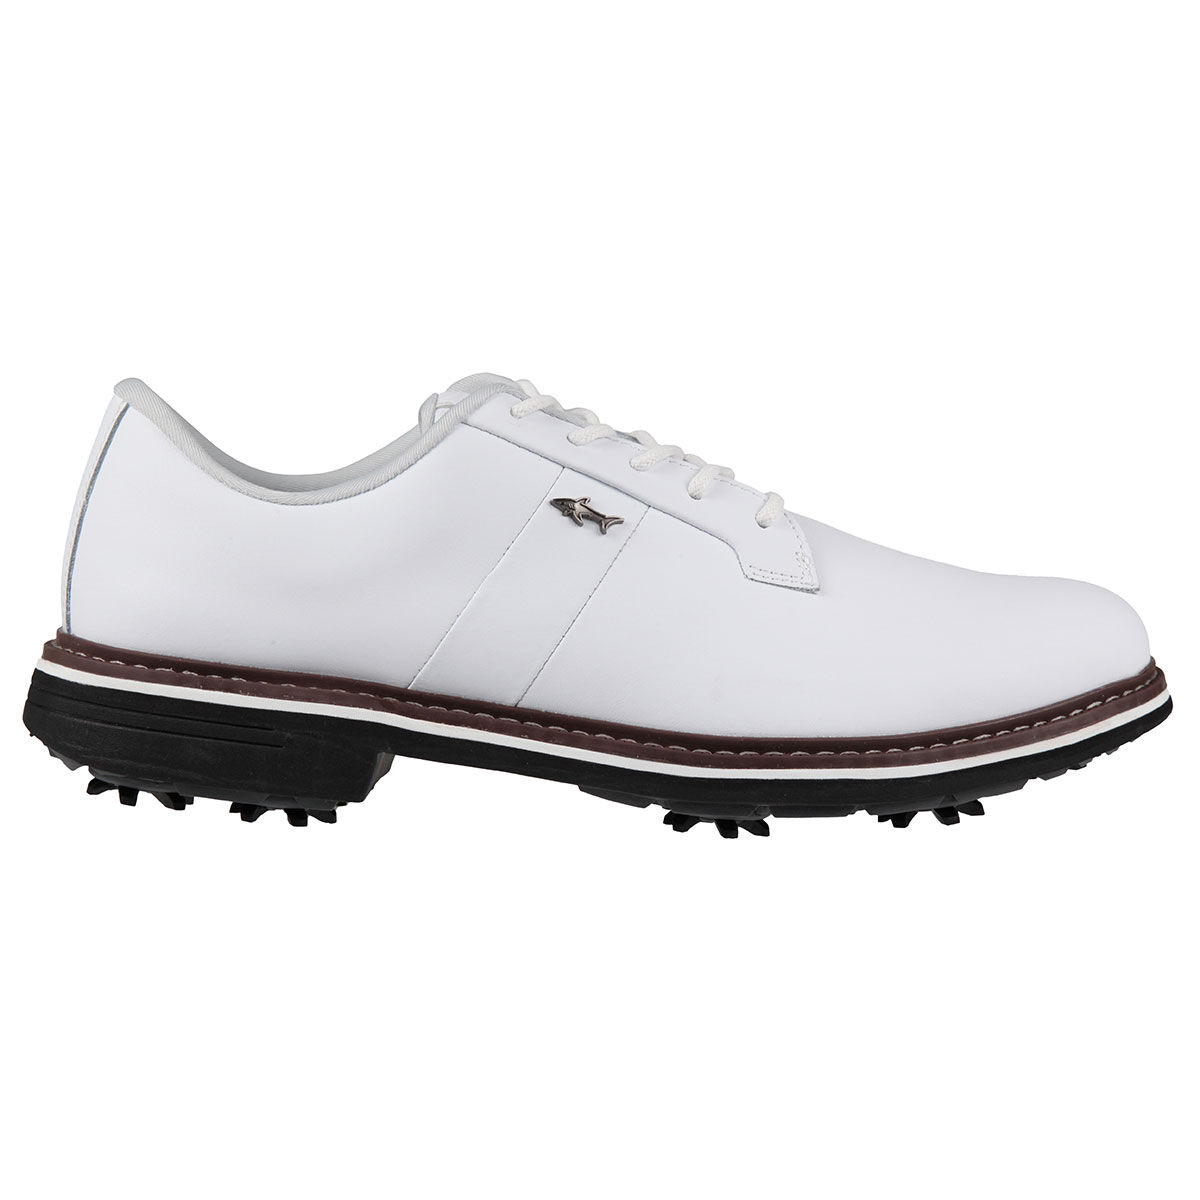 Greg Norman Mens White Comfortable Isa Tour 2 Waterproof Spiked Golf Shoes, Size: 9 | American Golf von Greg Norman